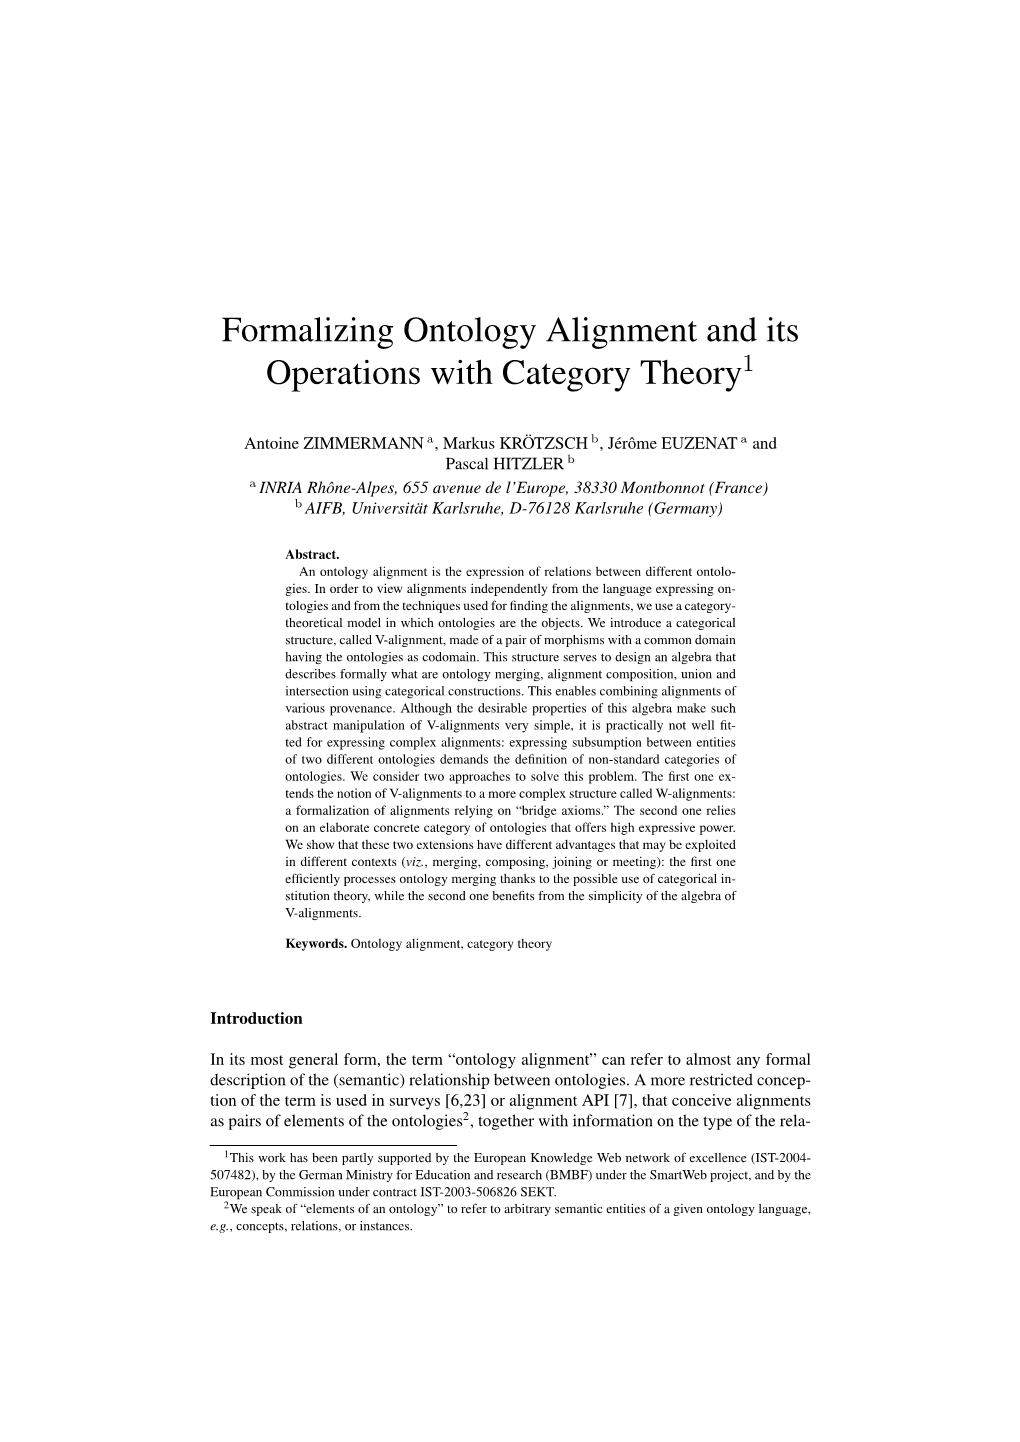 Formalizing Ontology Alignment and Its Operations with Category Theory1